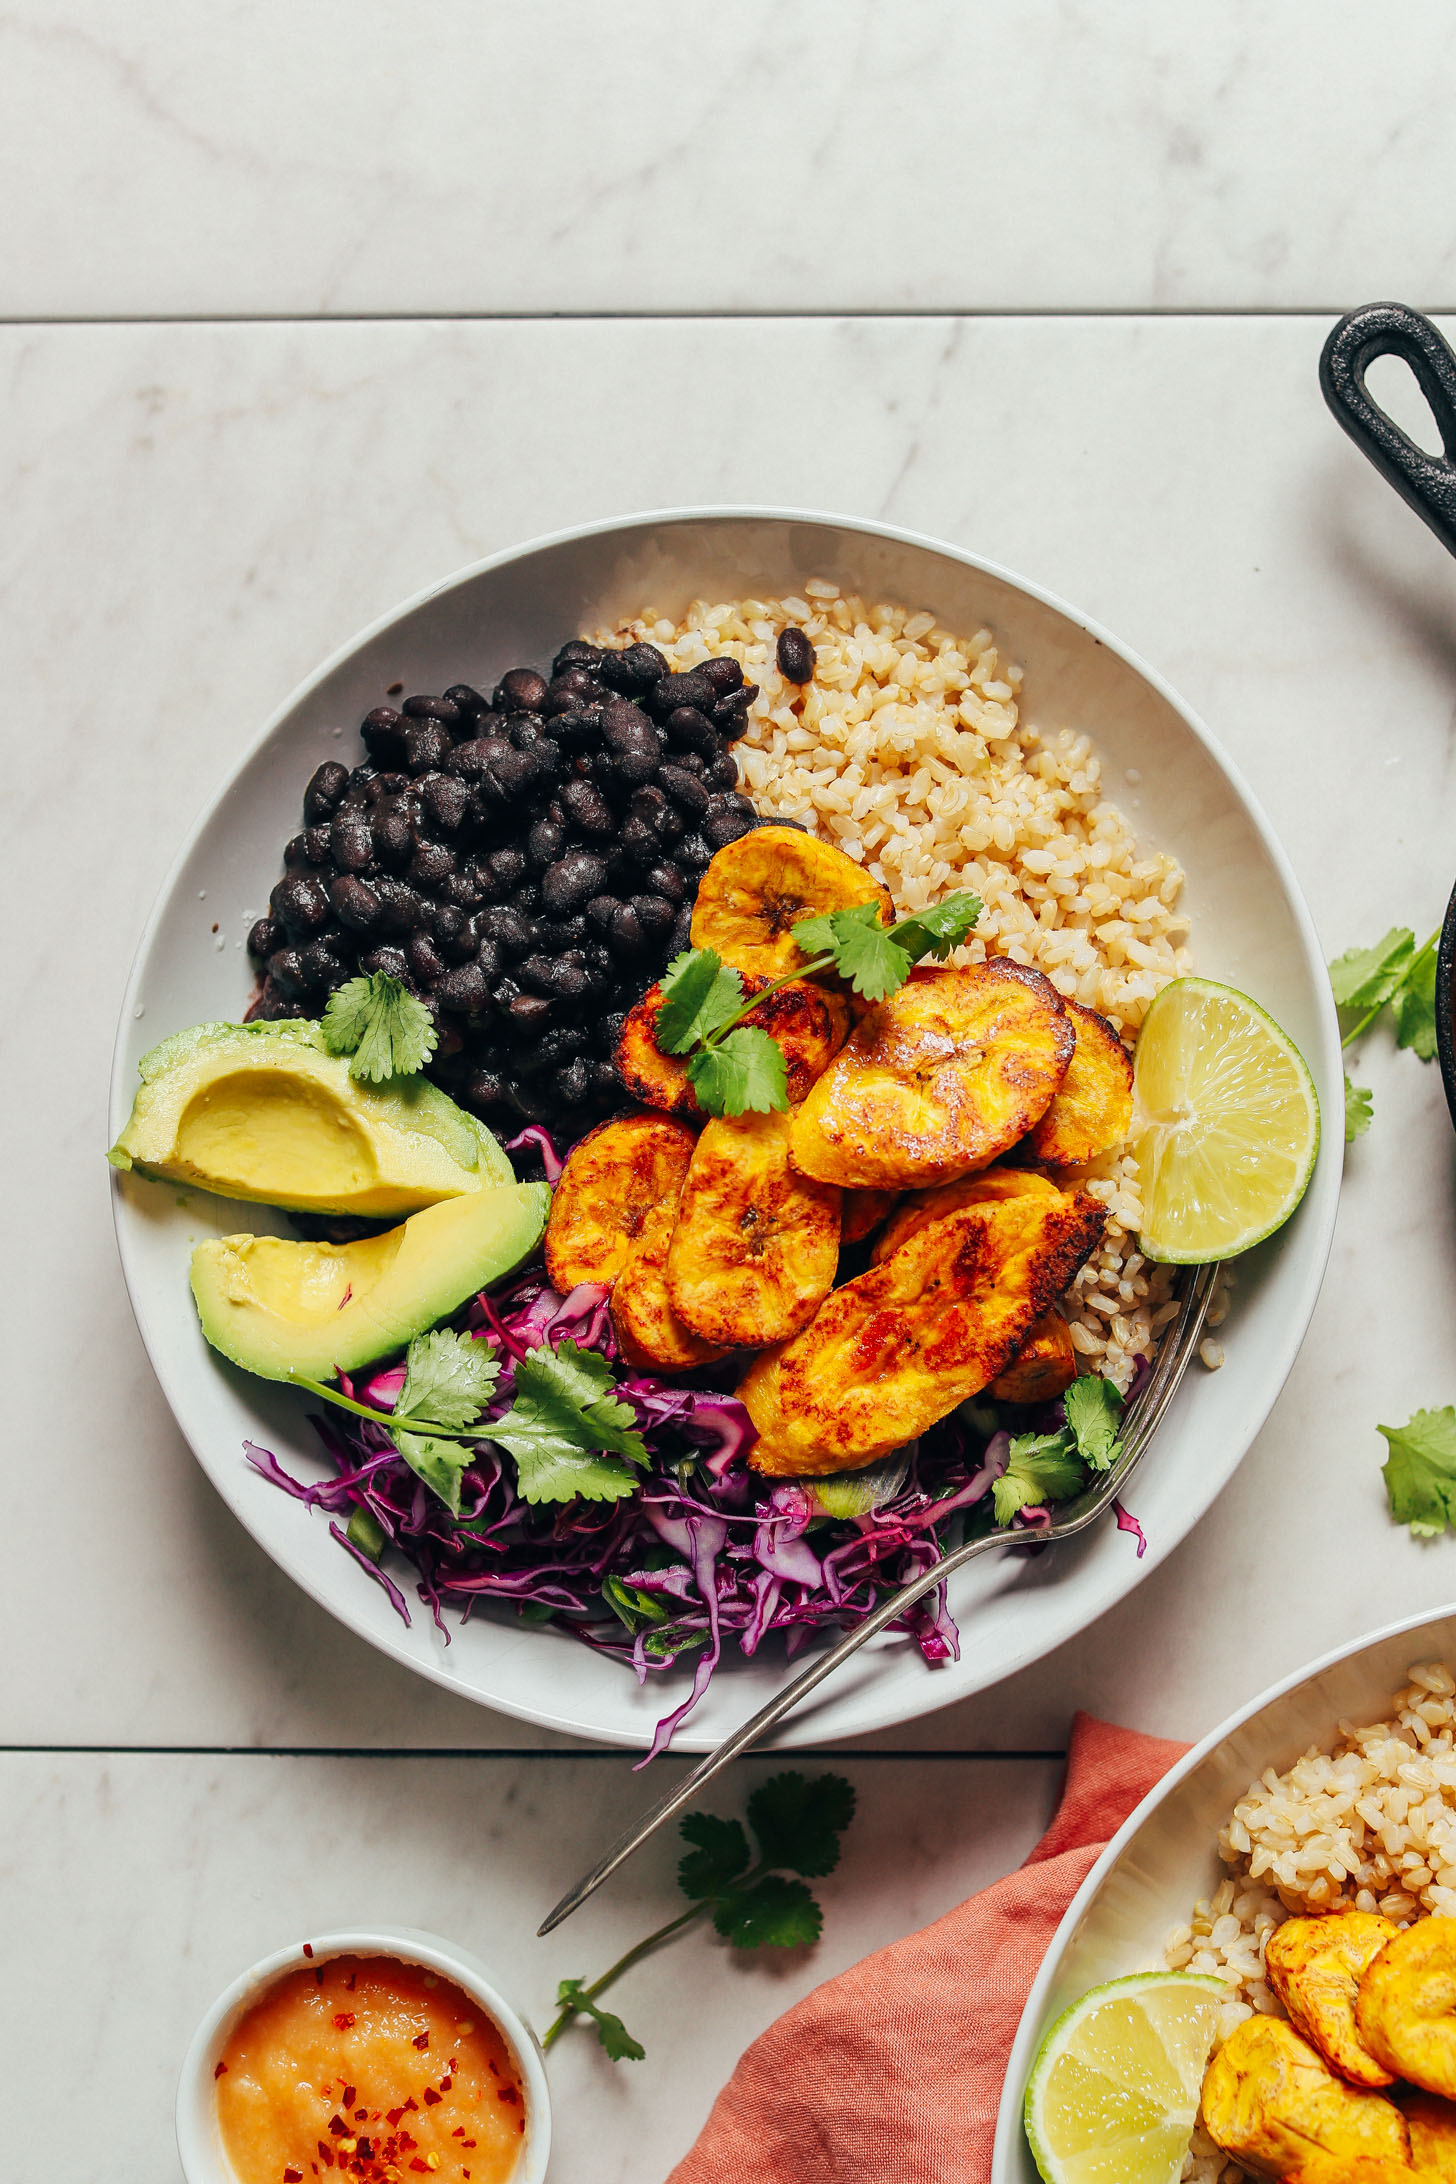 Fiber- and protein-rich ingredients make up this meal of Black Bean Plantain Bowls displayed here